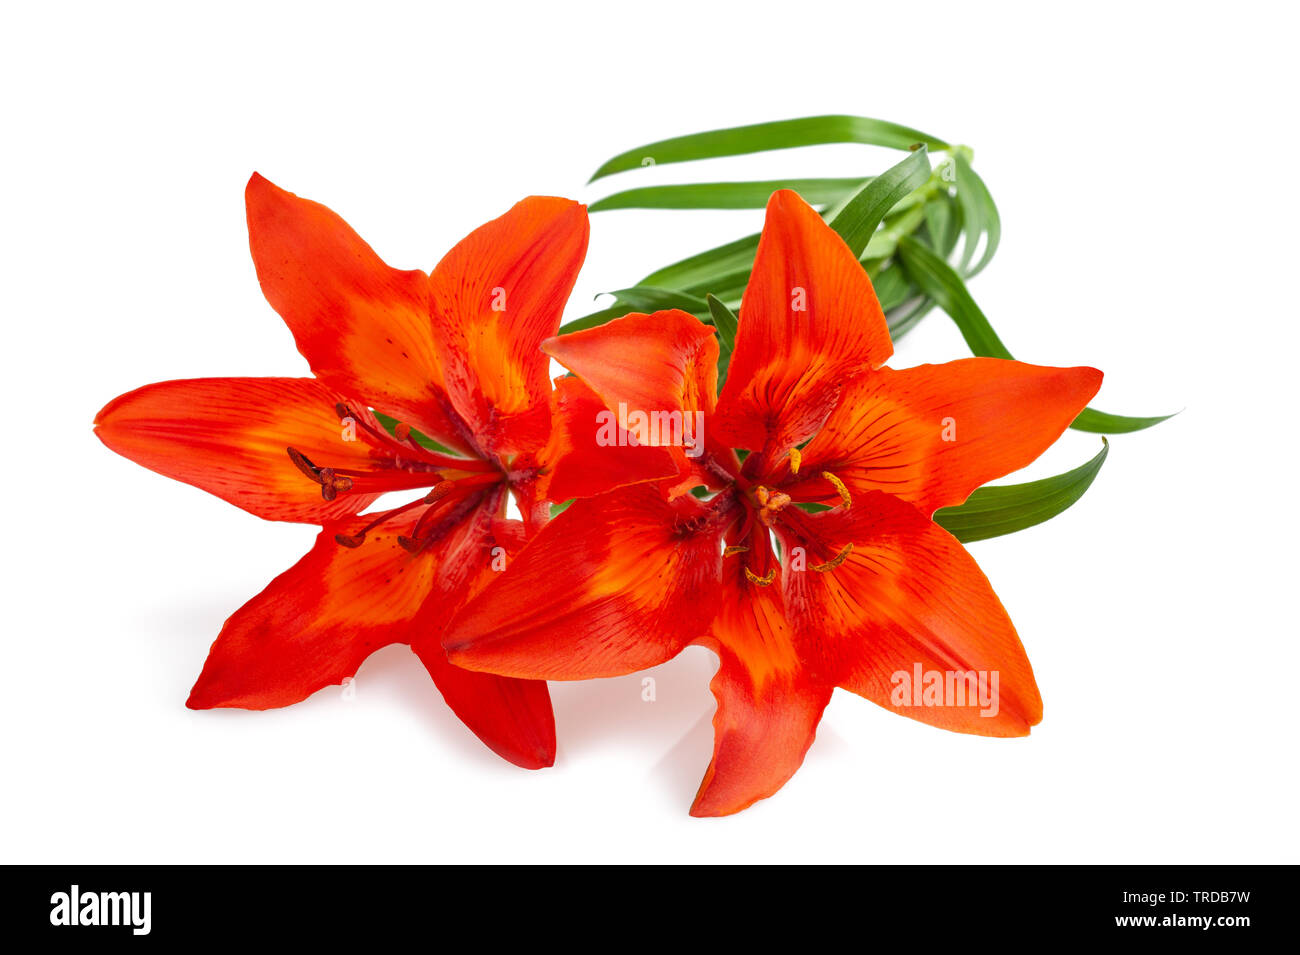 Lys Orange flower isolated on white backgrouind Banque D'Images